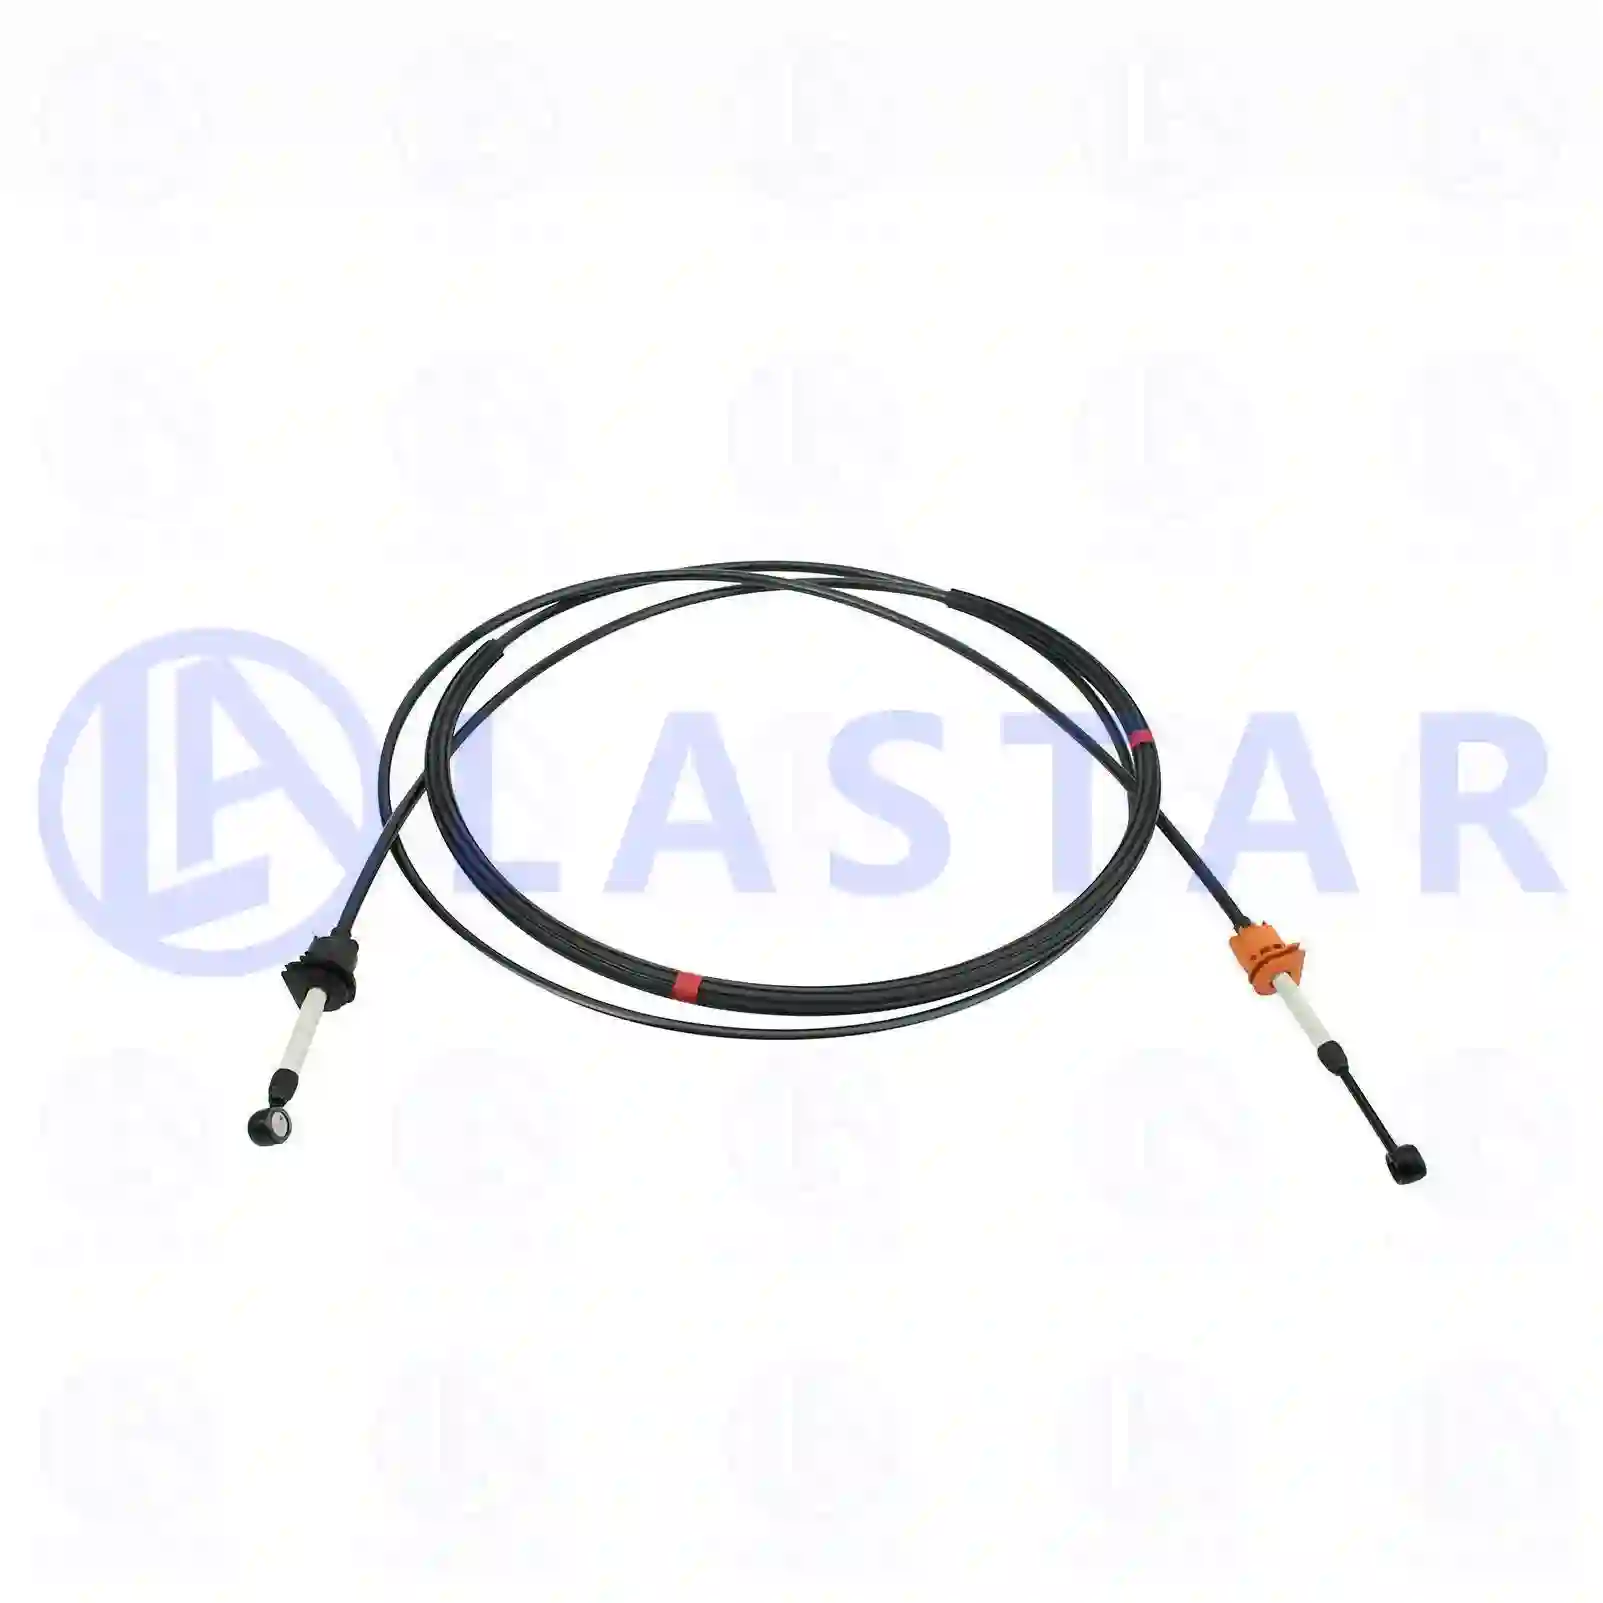 Control cable, switching, 77732241, 20545996, 20700996, 21002896, 21343596, 21789730, ZG21343-0008 ||  77732241 Lastar Spare Part | Truck Spare Parts, Auotomotive Spare Parts Control cable, switching, 77732241, 20545996, 20700996, 21002896, 21343596, 21789730, ZG21343-0008 ||  77732241 Lastar Spare Part | Truck Spare Parts, Auotomotive Spare Parts